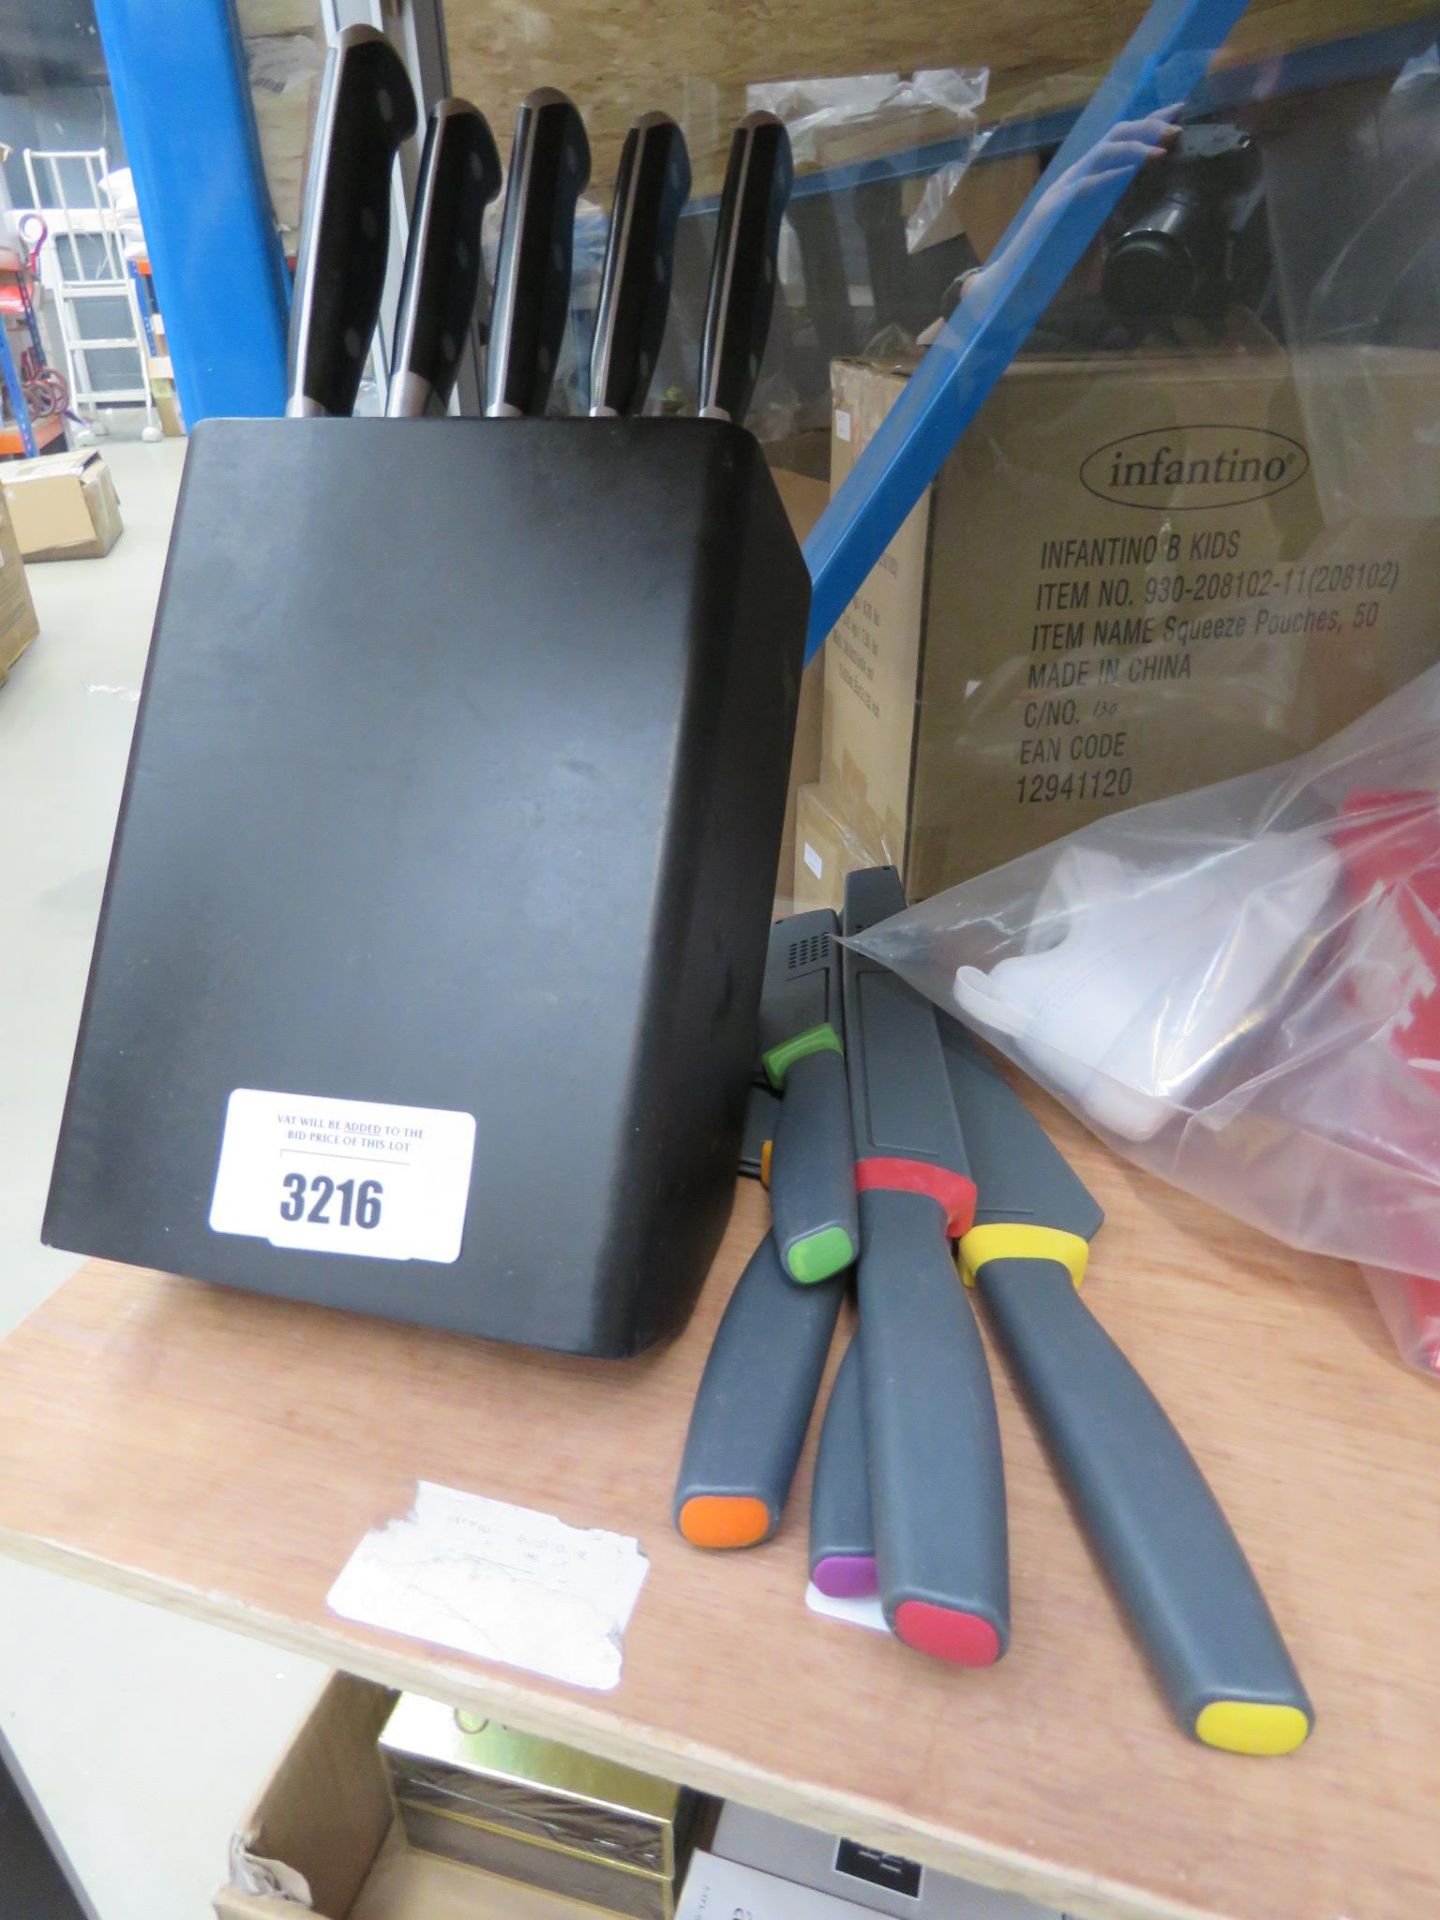 Fabreware knife block and knife set plus other loose kitchen knives